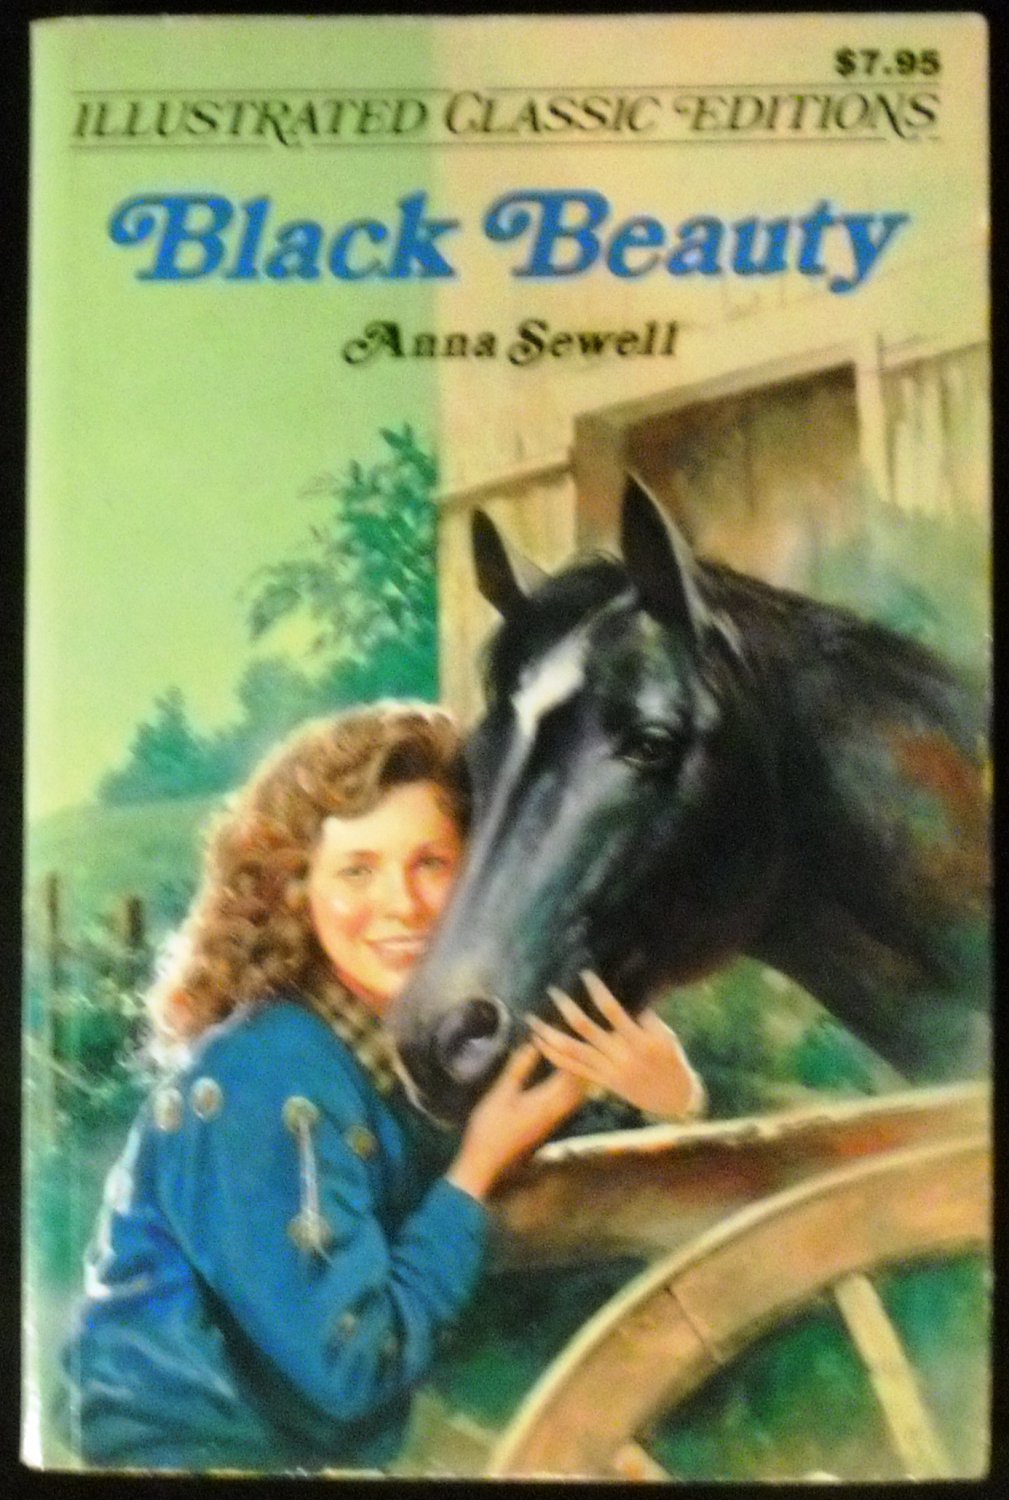 Black Beauty Illustrated Classic Editions Paperback Anna Sewell Author